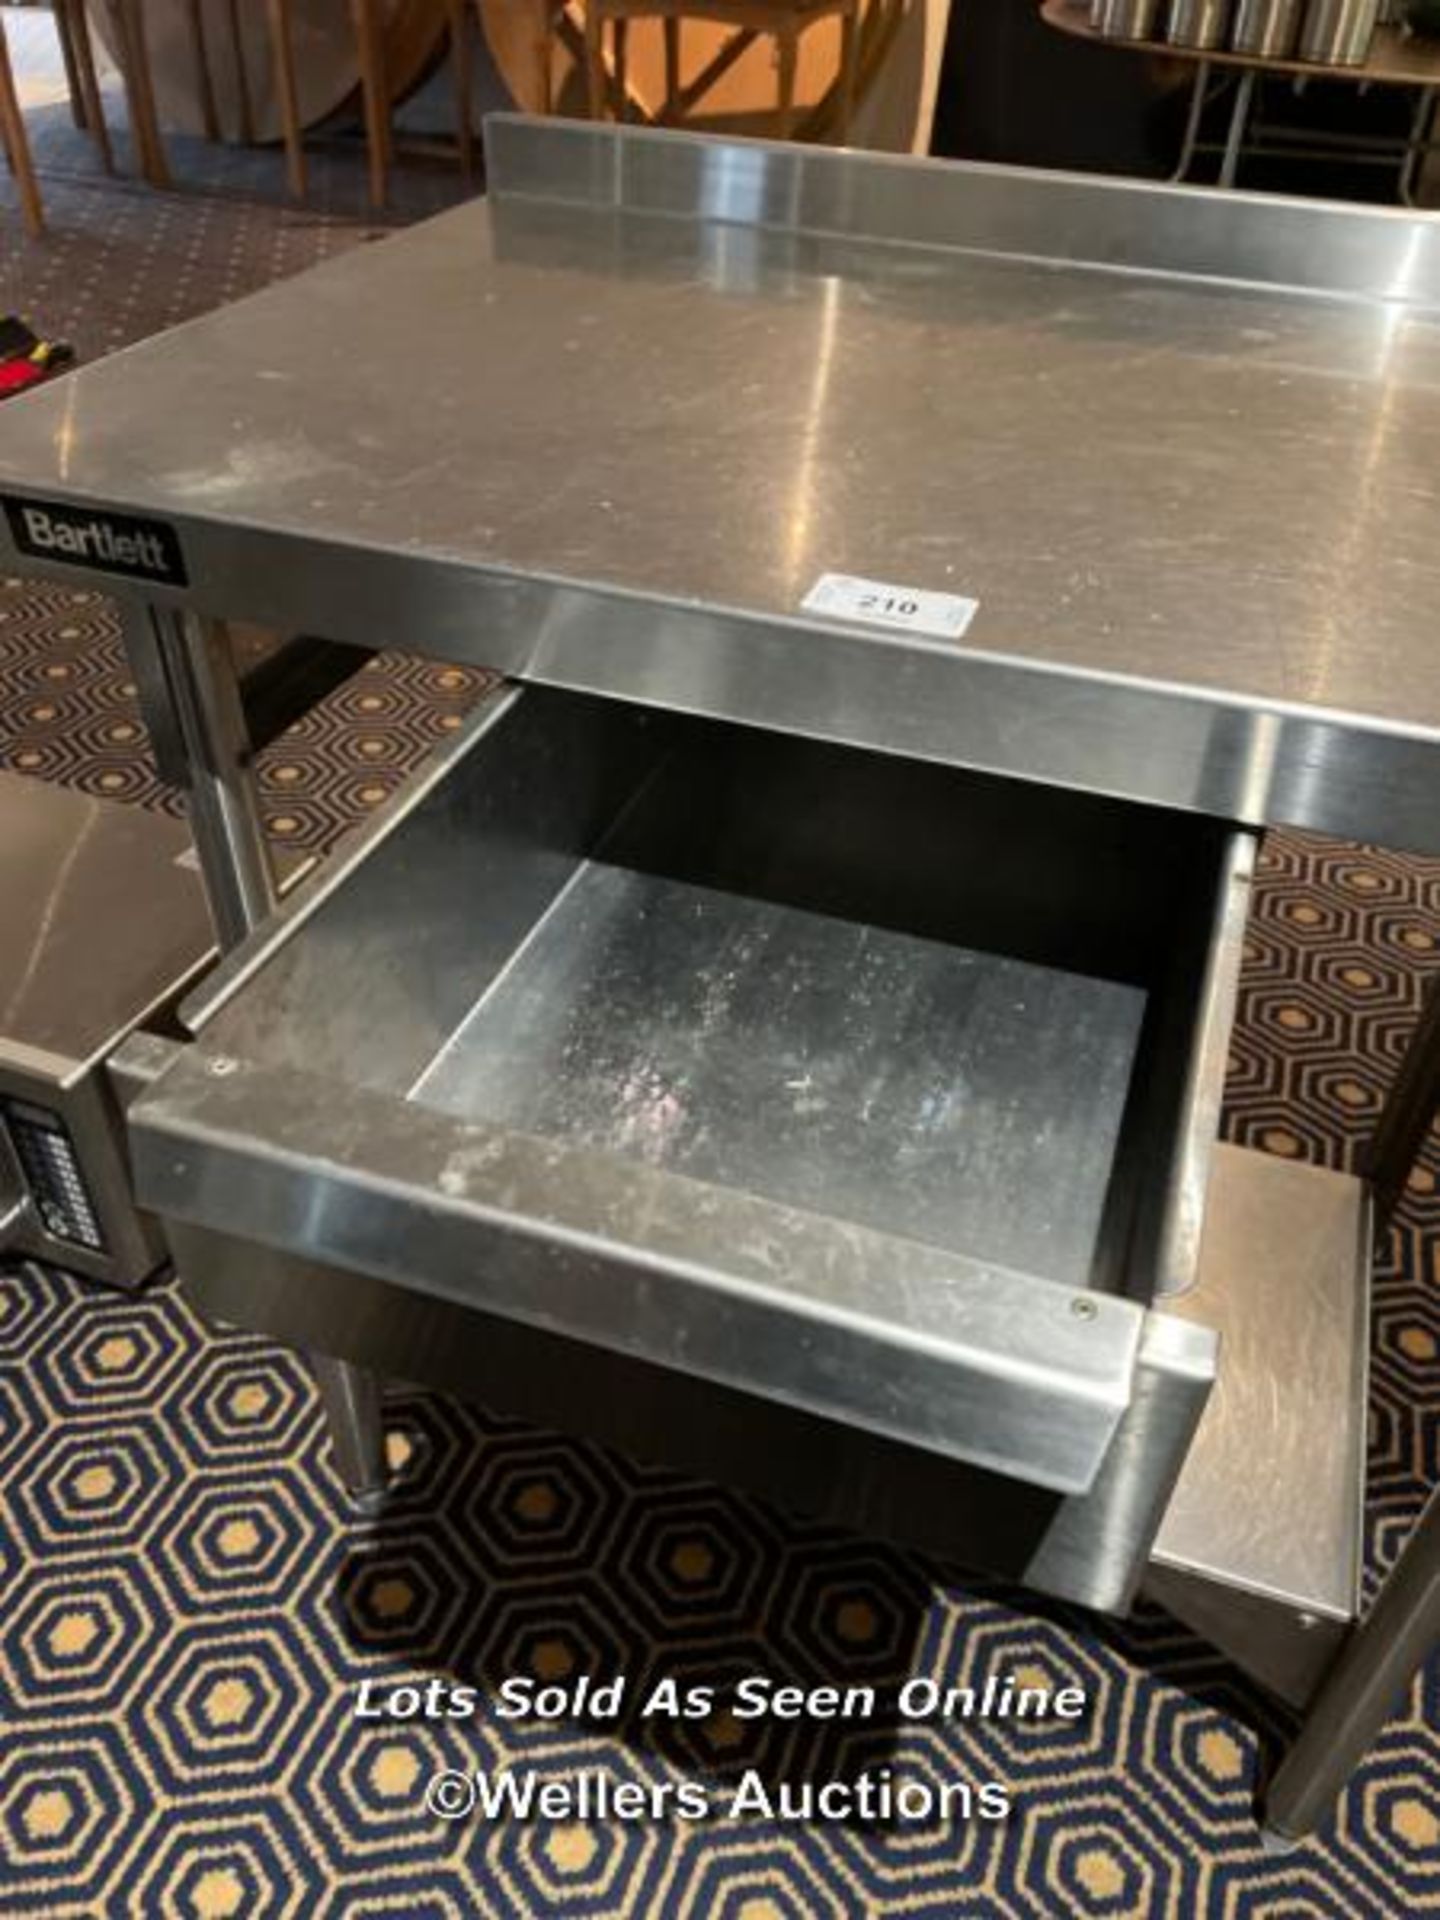 BARTLETT TWO TIER STAINLESS STEEL COMMERCIAL KITCHEN WORK BENCH, WITH DRAWER, 96CM (H) X 90CM (W) - Image 2 of 3